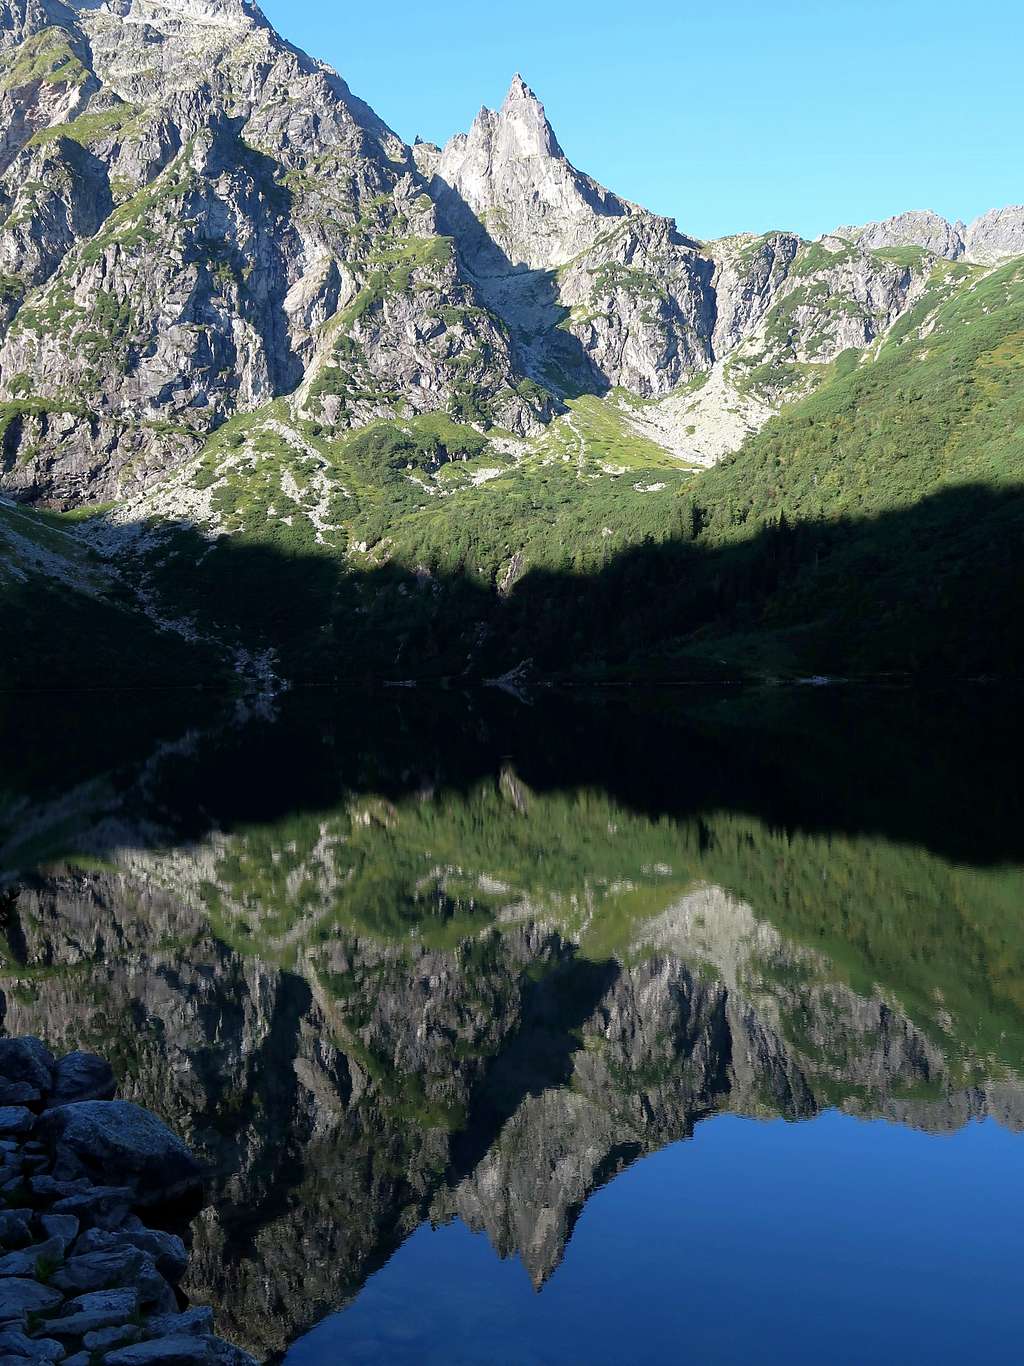 Mnich looking in mirror (NO HDR)